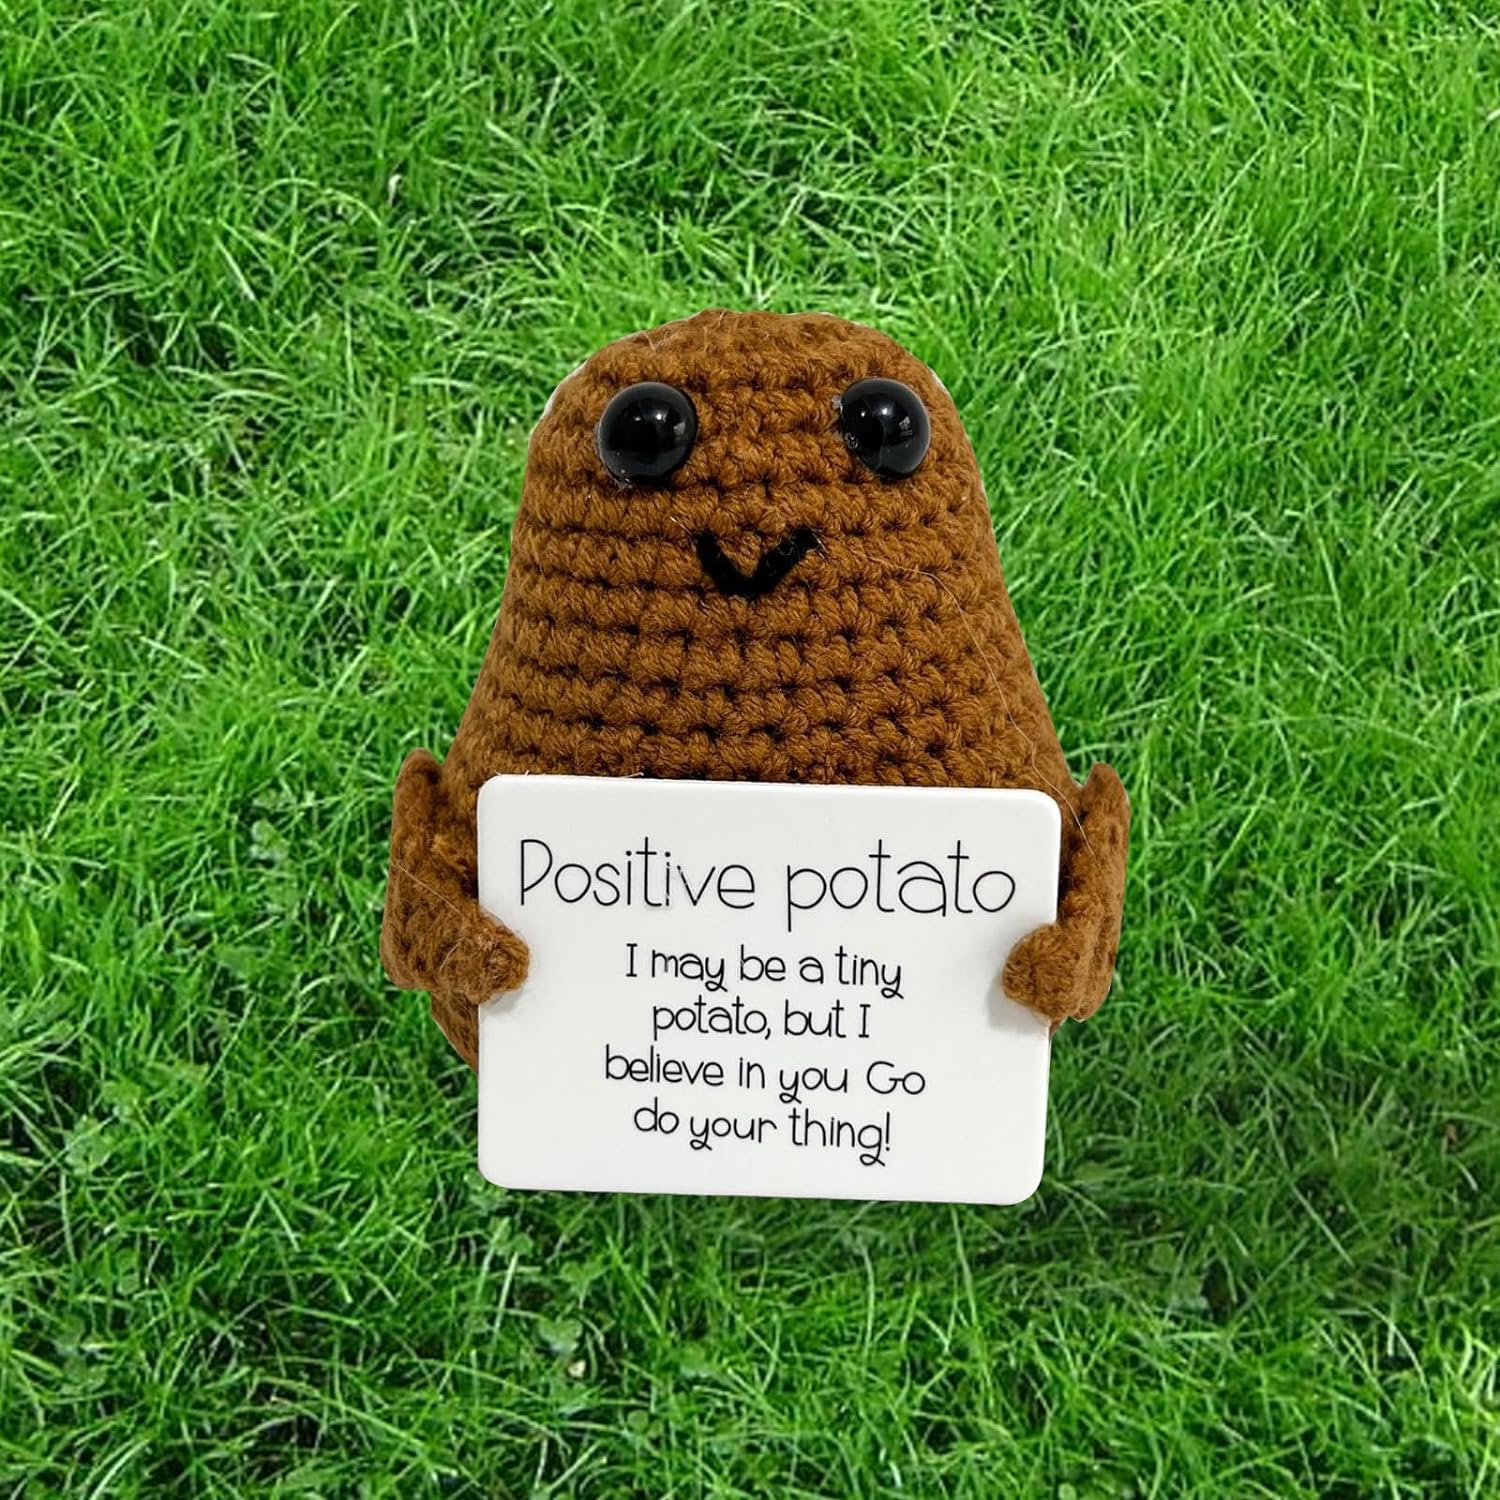 Positive Doll Potato Funny Knitting Soft Doll Cute Knitted Pocket Hug Potato Doll with Positive Card Novelty Gifts